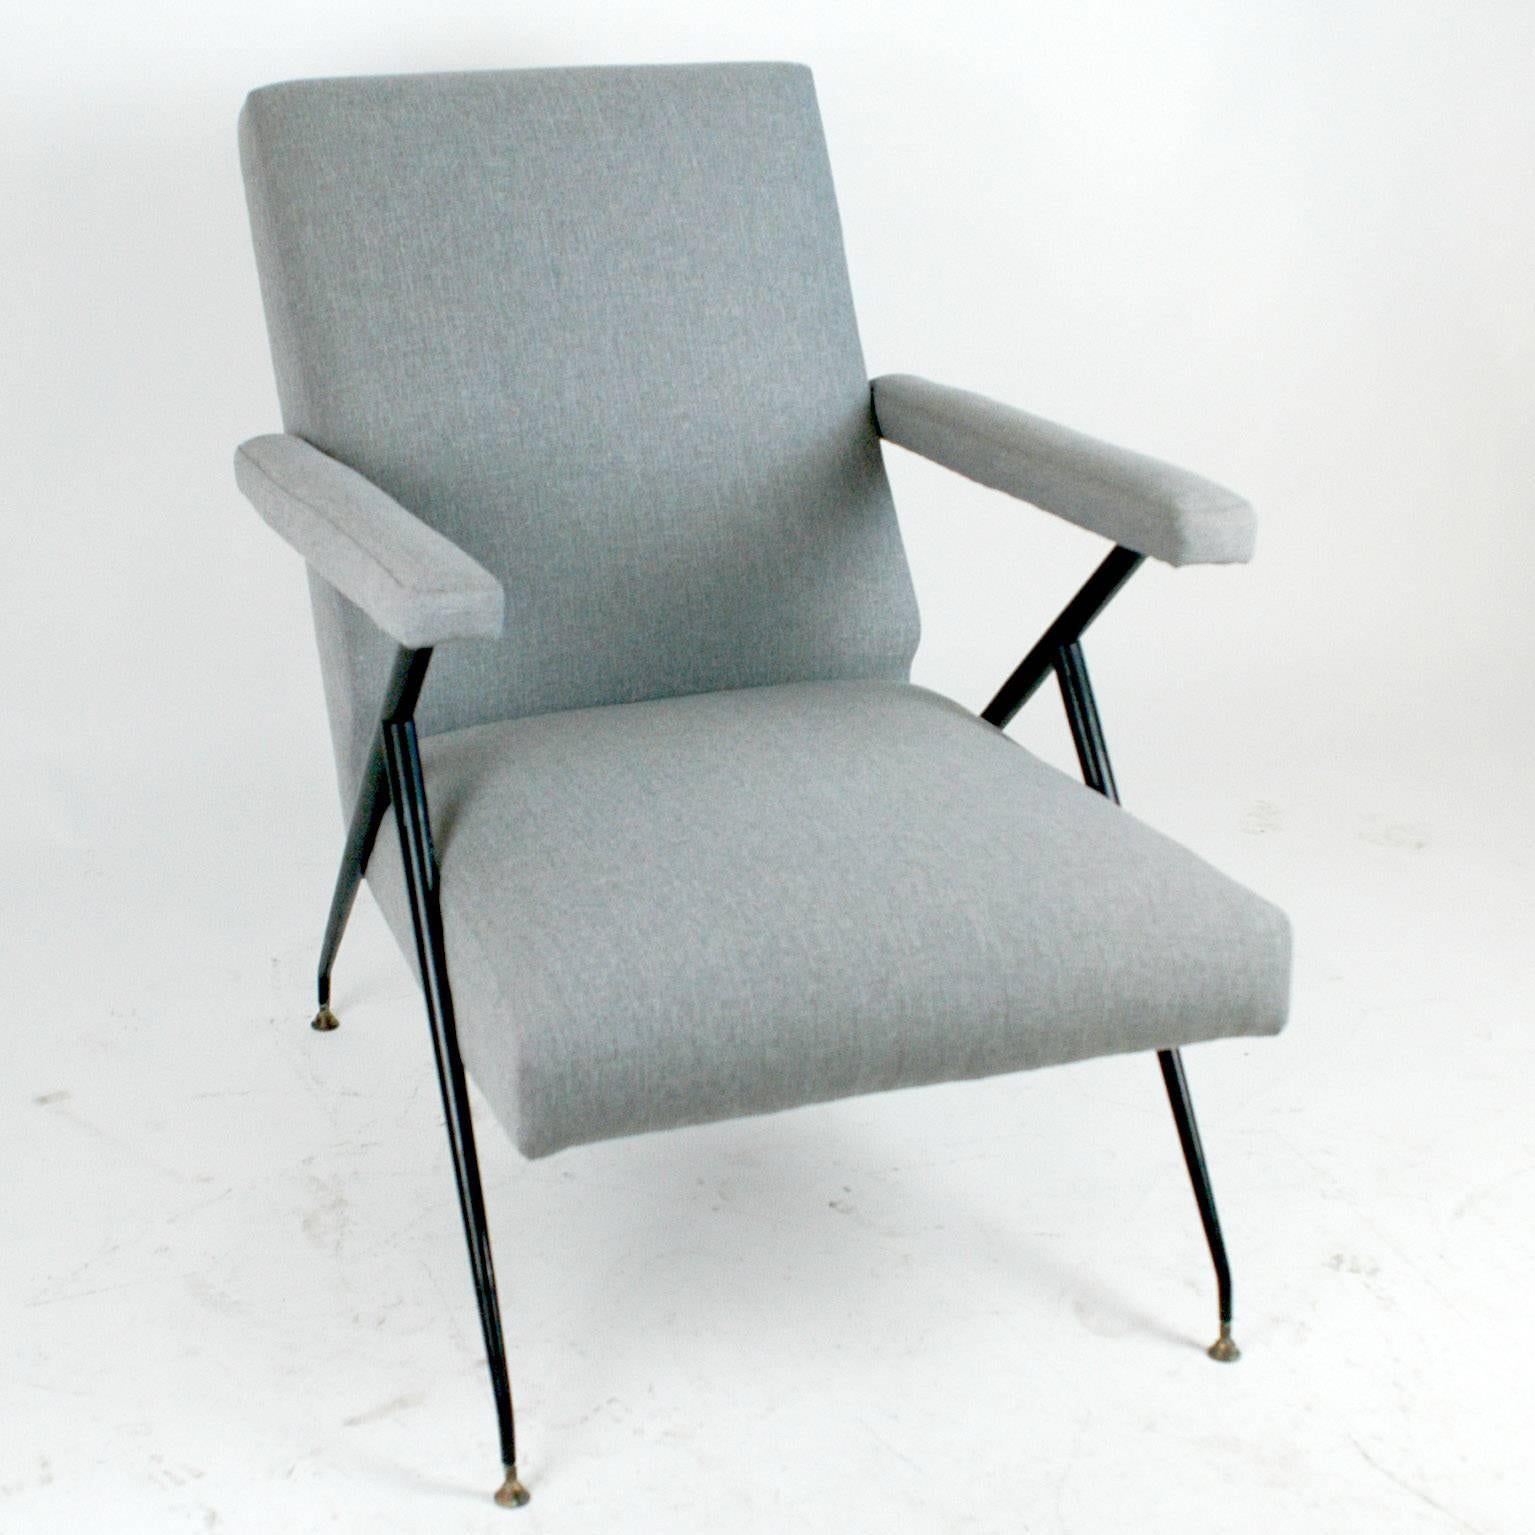 Highly comfortable and elegant Italian armchair with black laquered base, brass shoes and new light grey fabric upholstery.
The back can be adjusted in two positions.
Second piece available.